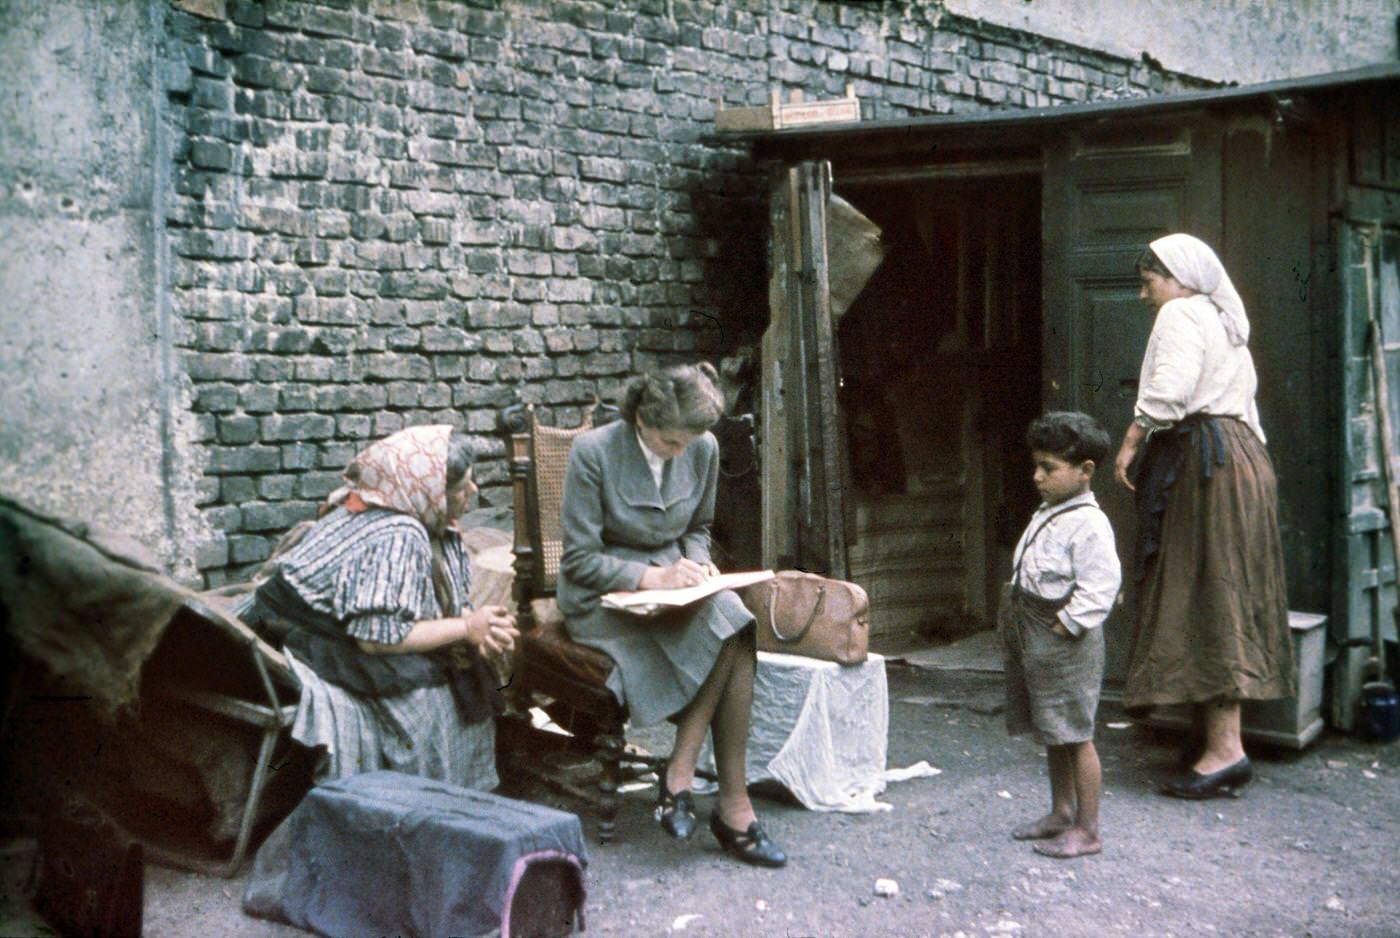 Eva Justin of the Racial Hygiene Research Center conducting an interview with an old woman during the Gypsy (Sinti and Roma) deportation in 1938.